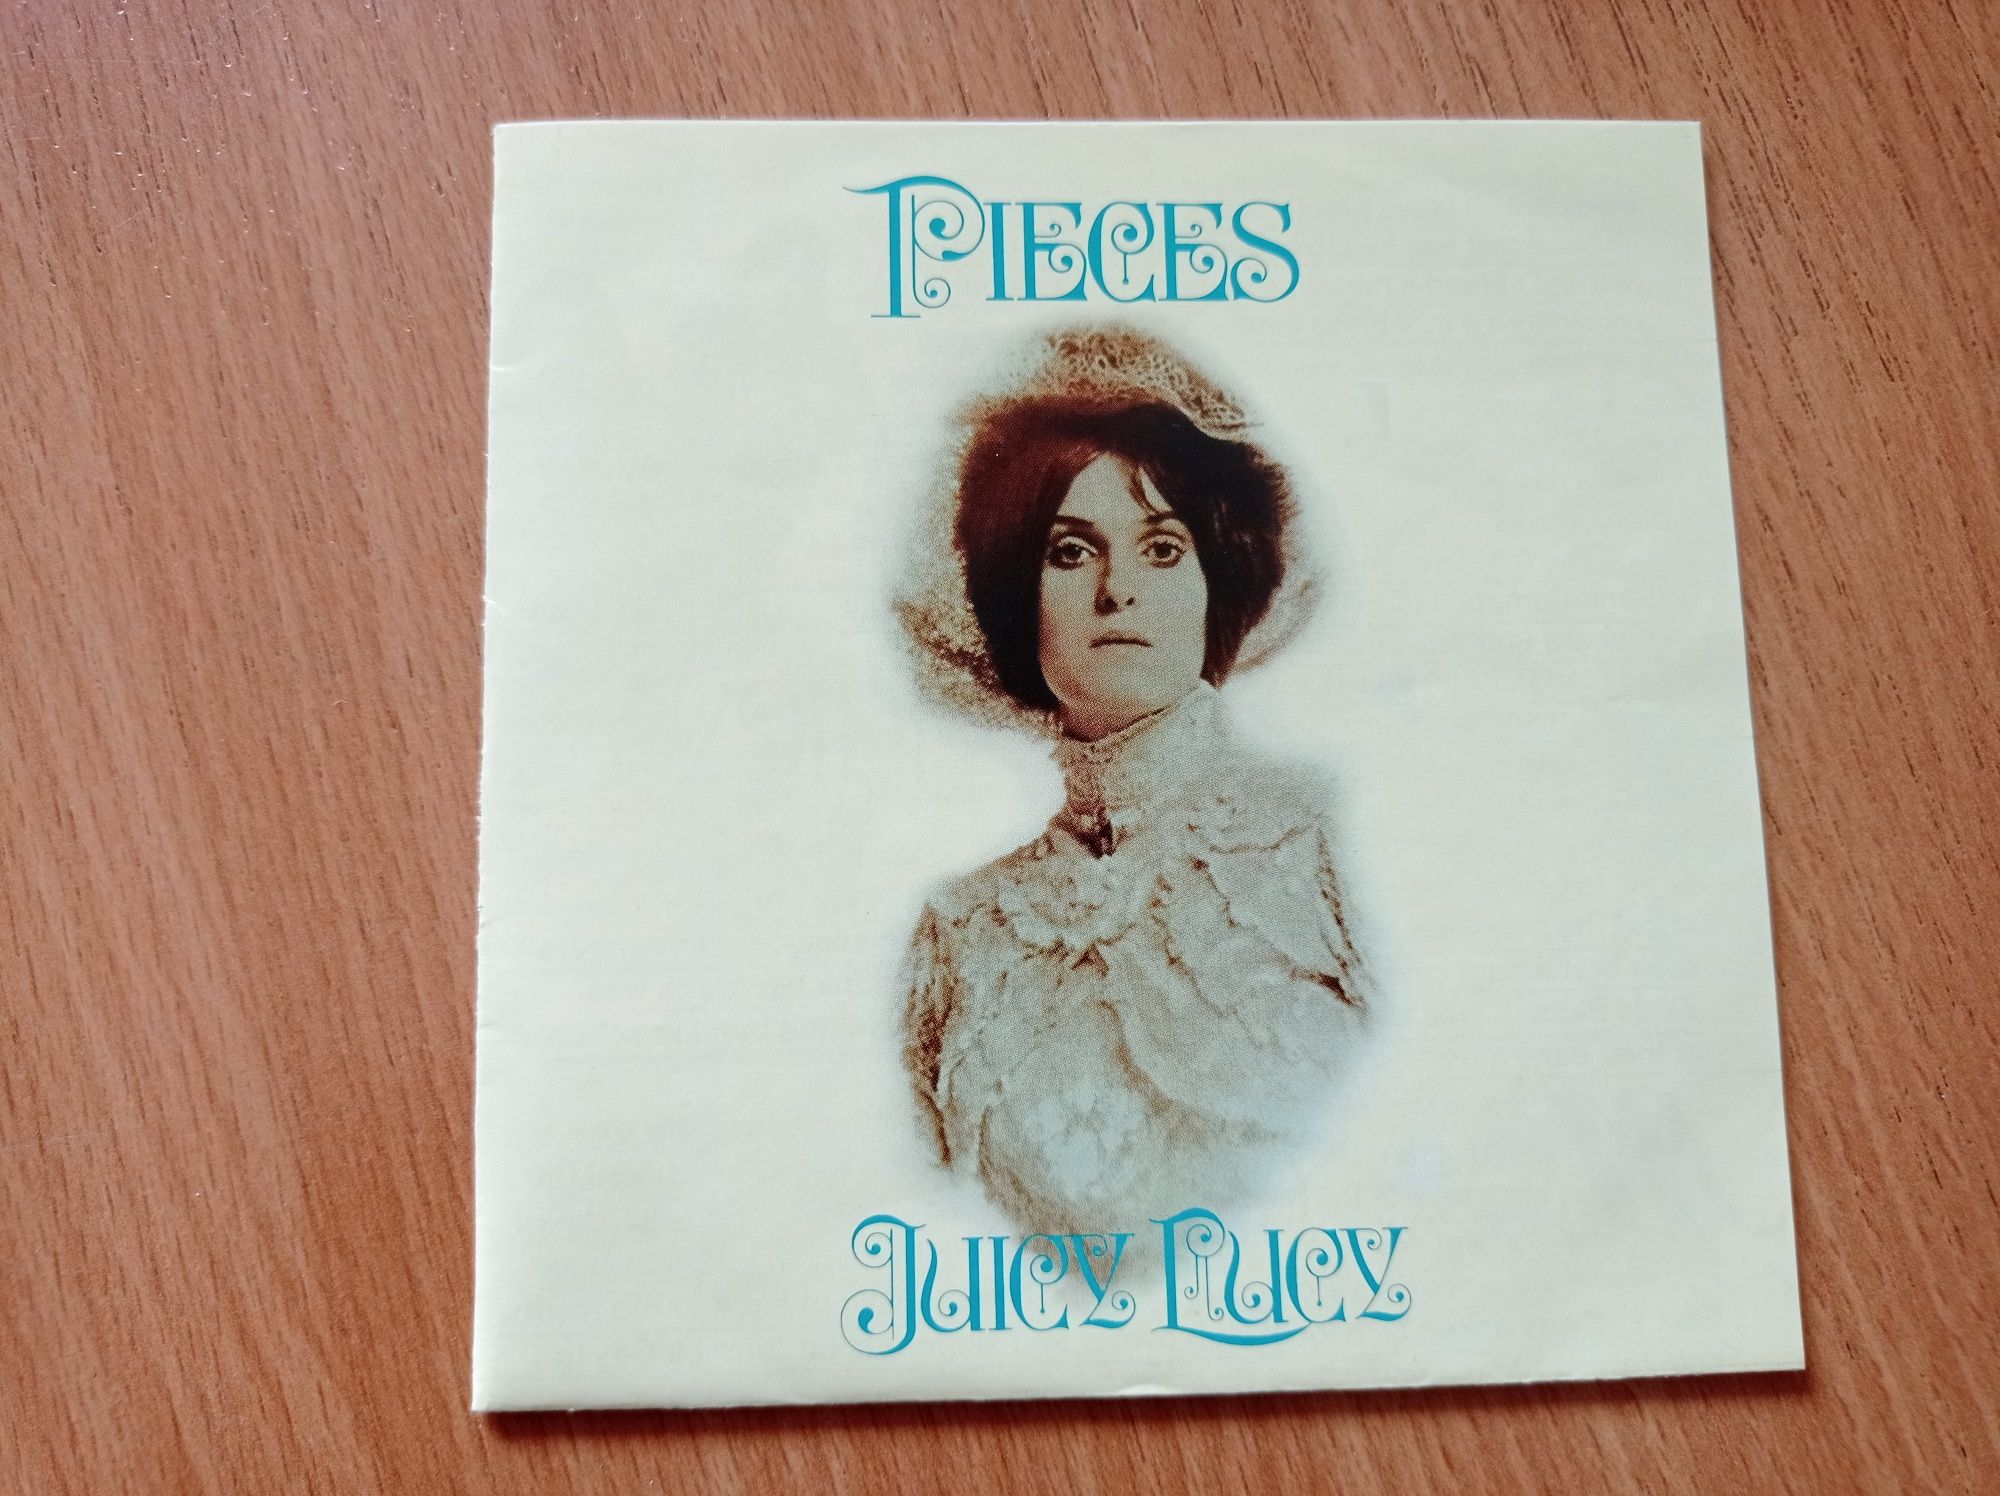 Juicy Lucy - Pieces